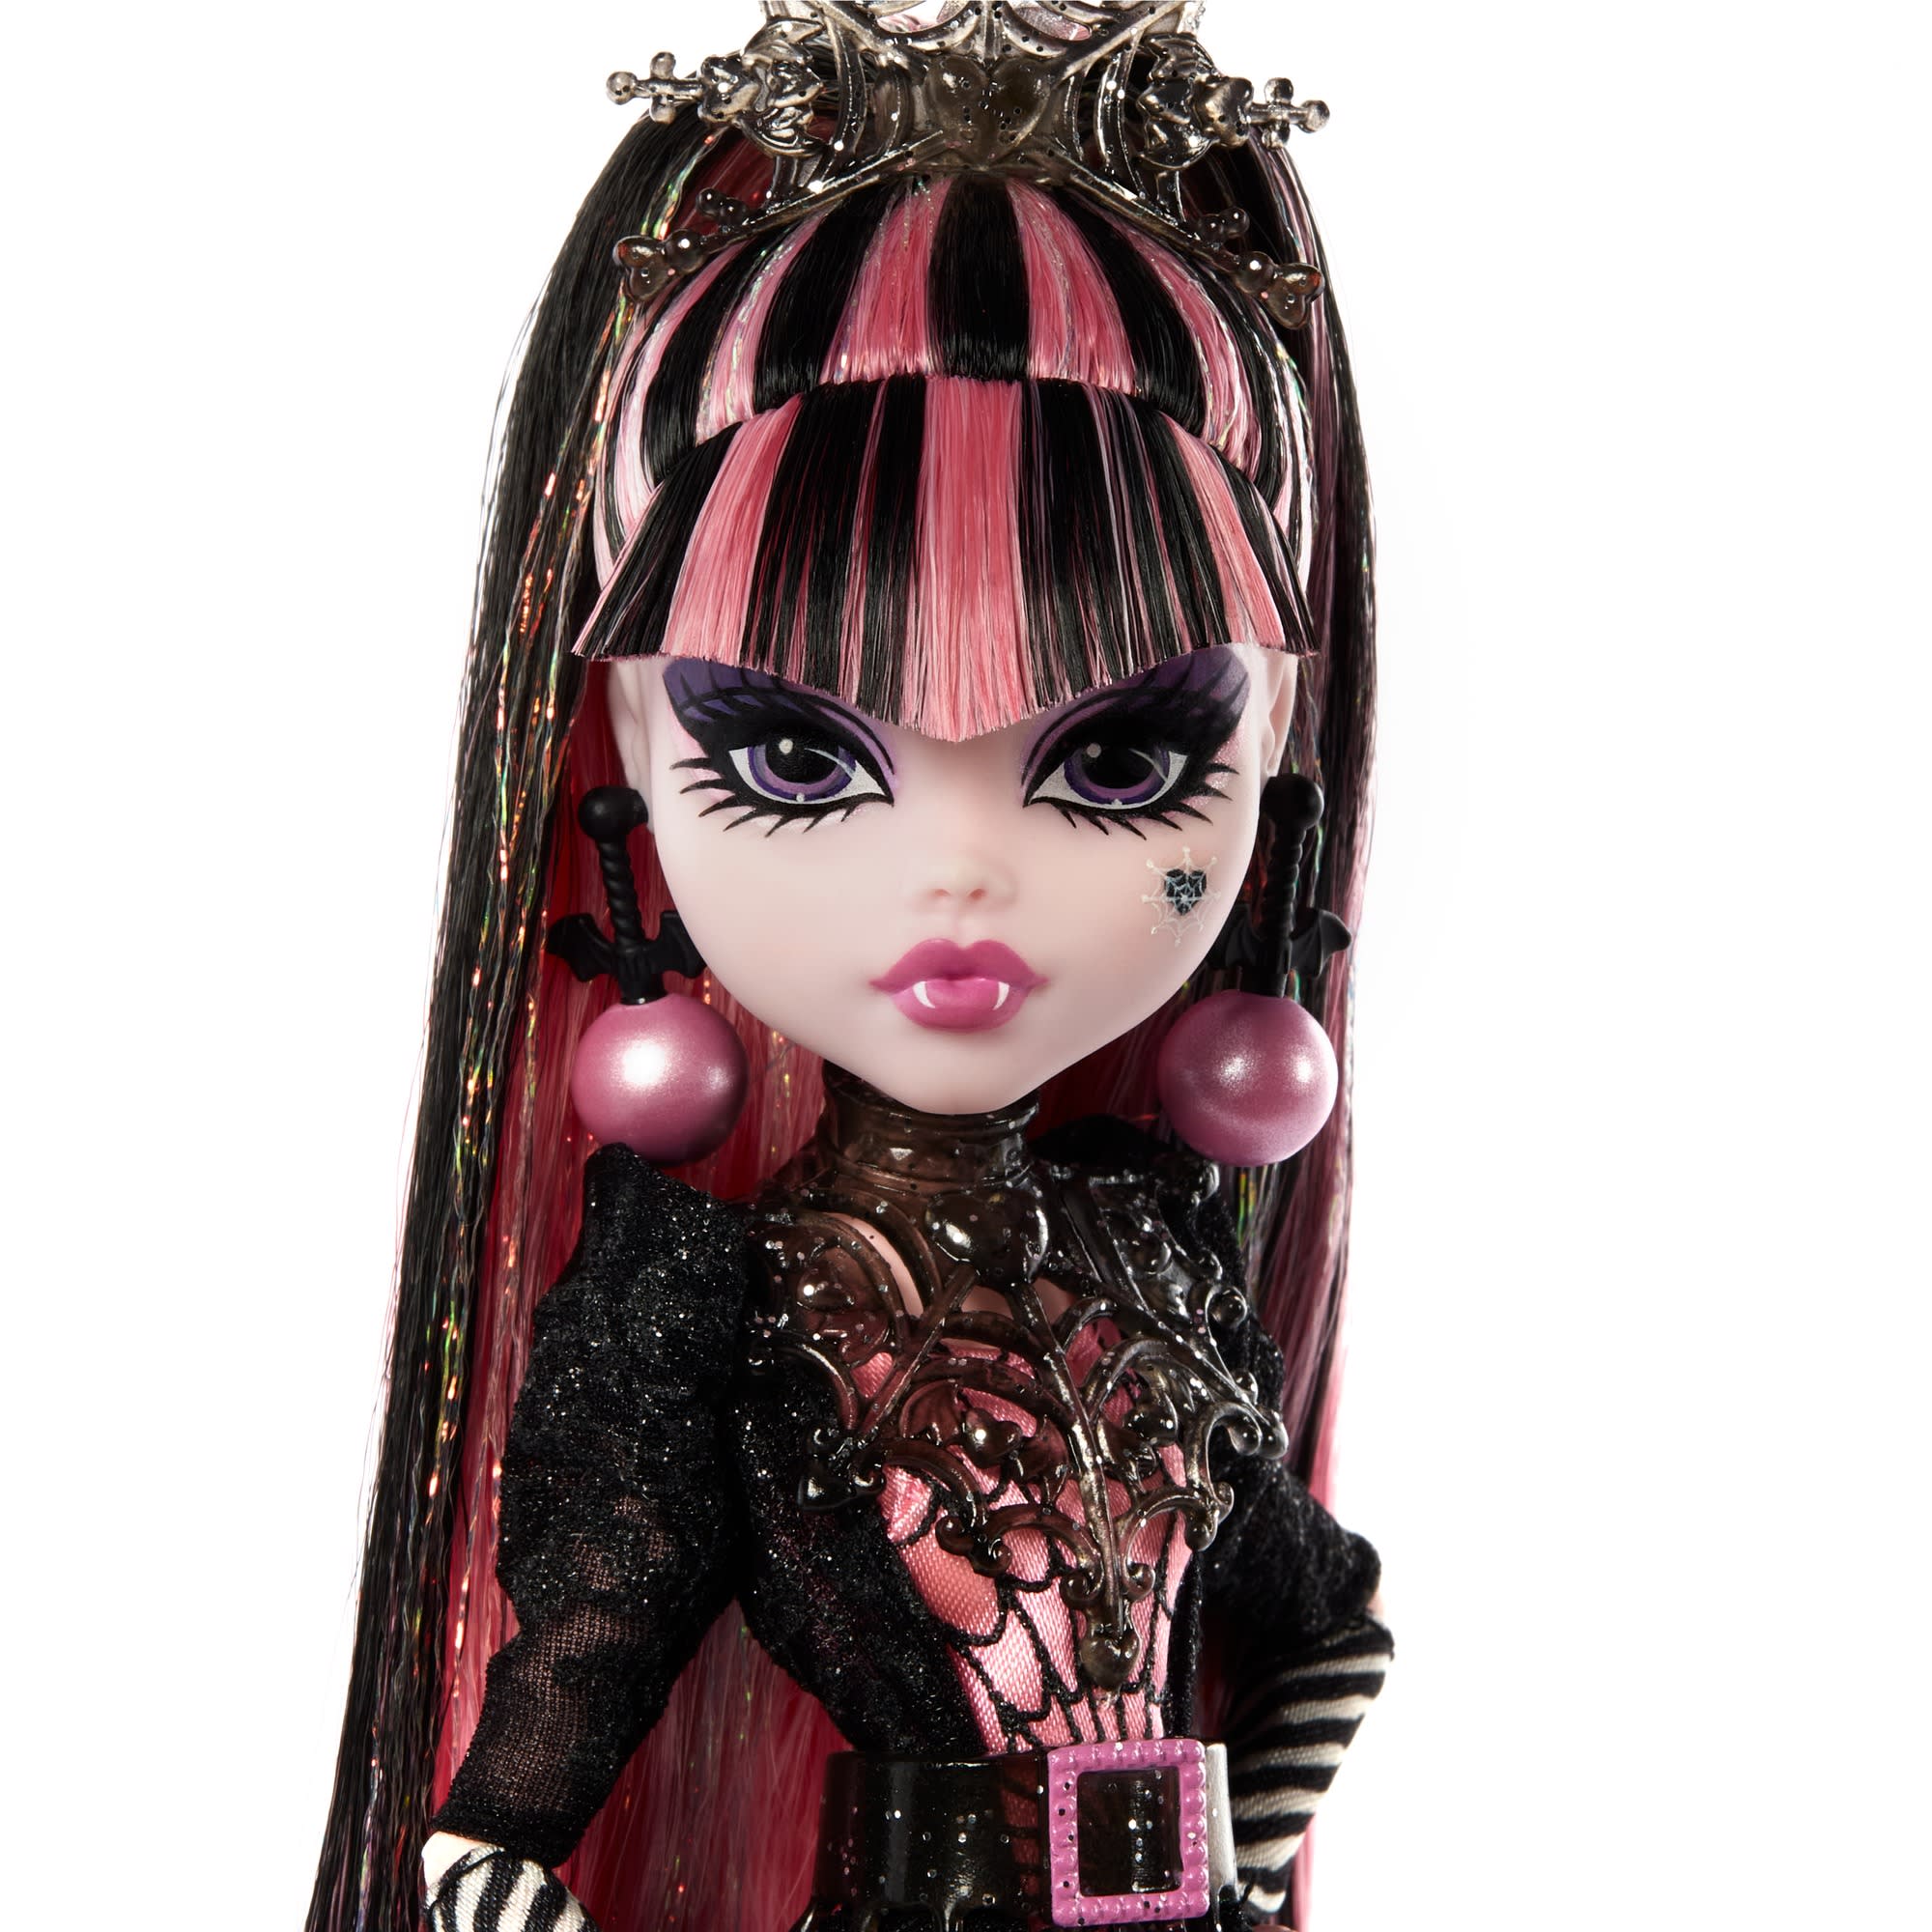 With Rainbow High getting a Switch game, do we think MH will be getting one  too?? :D : r/MonsterHigh